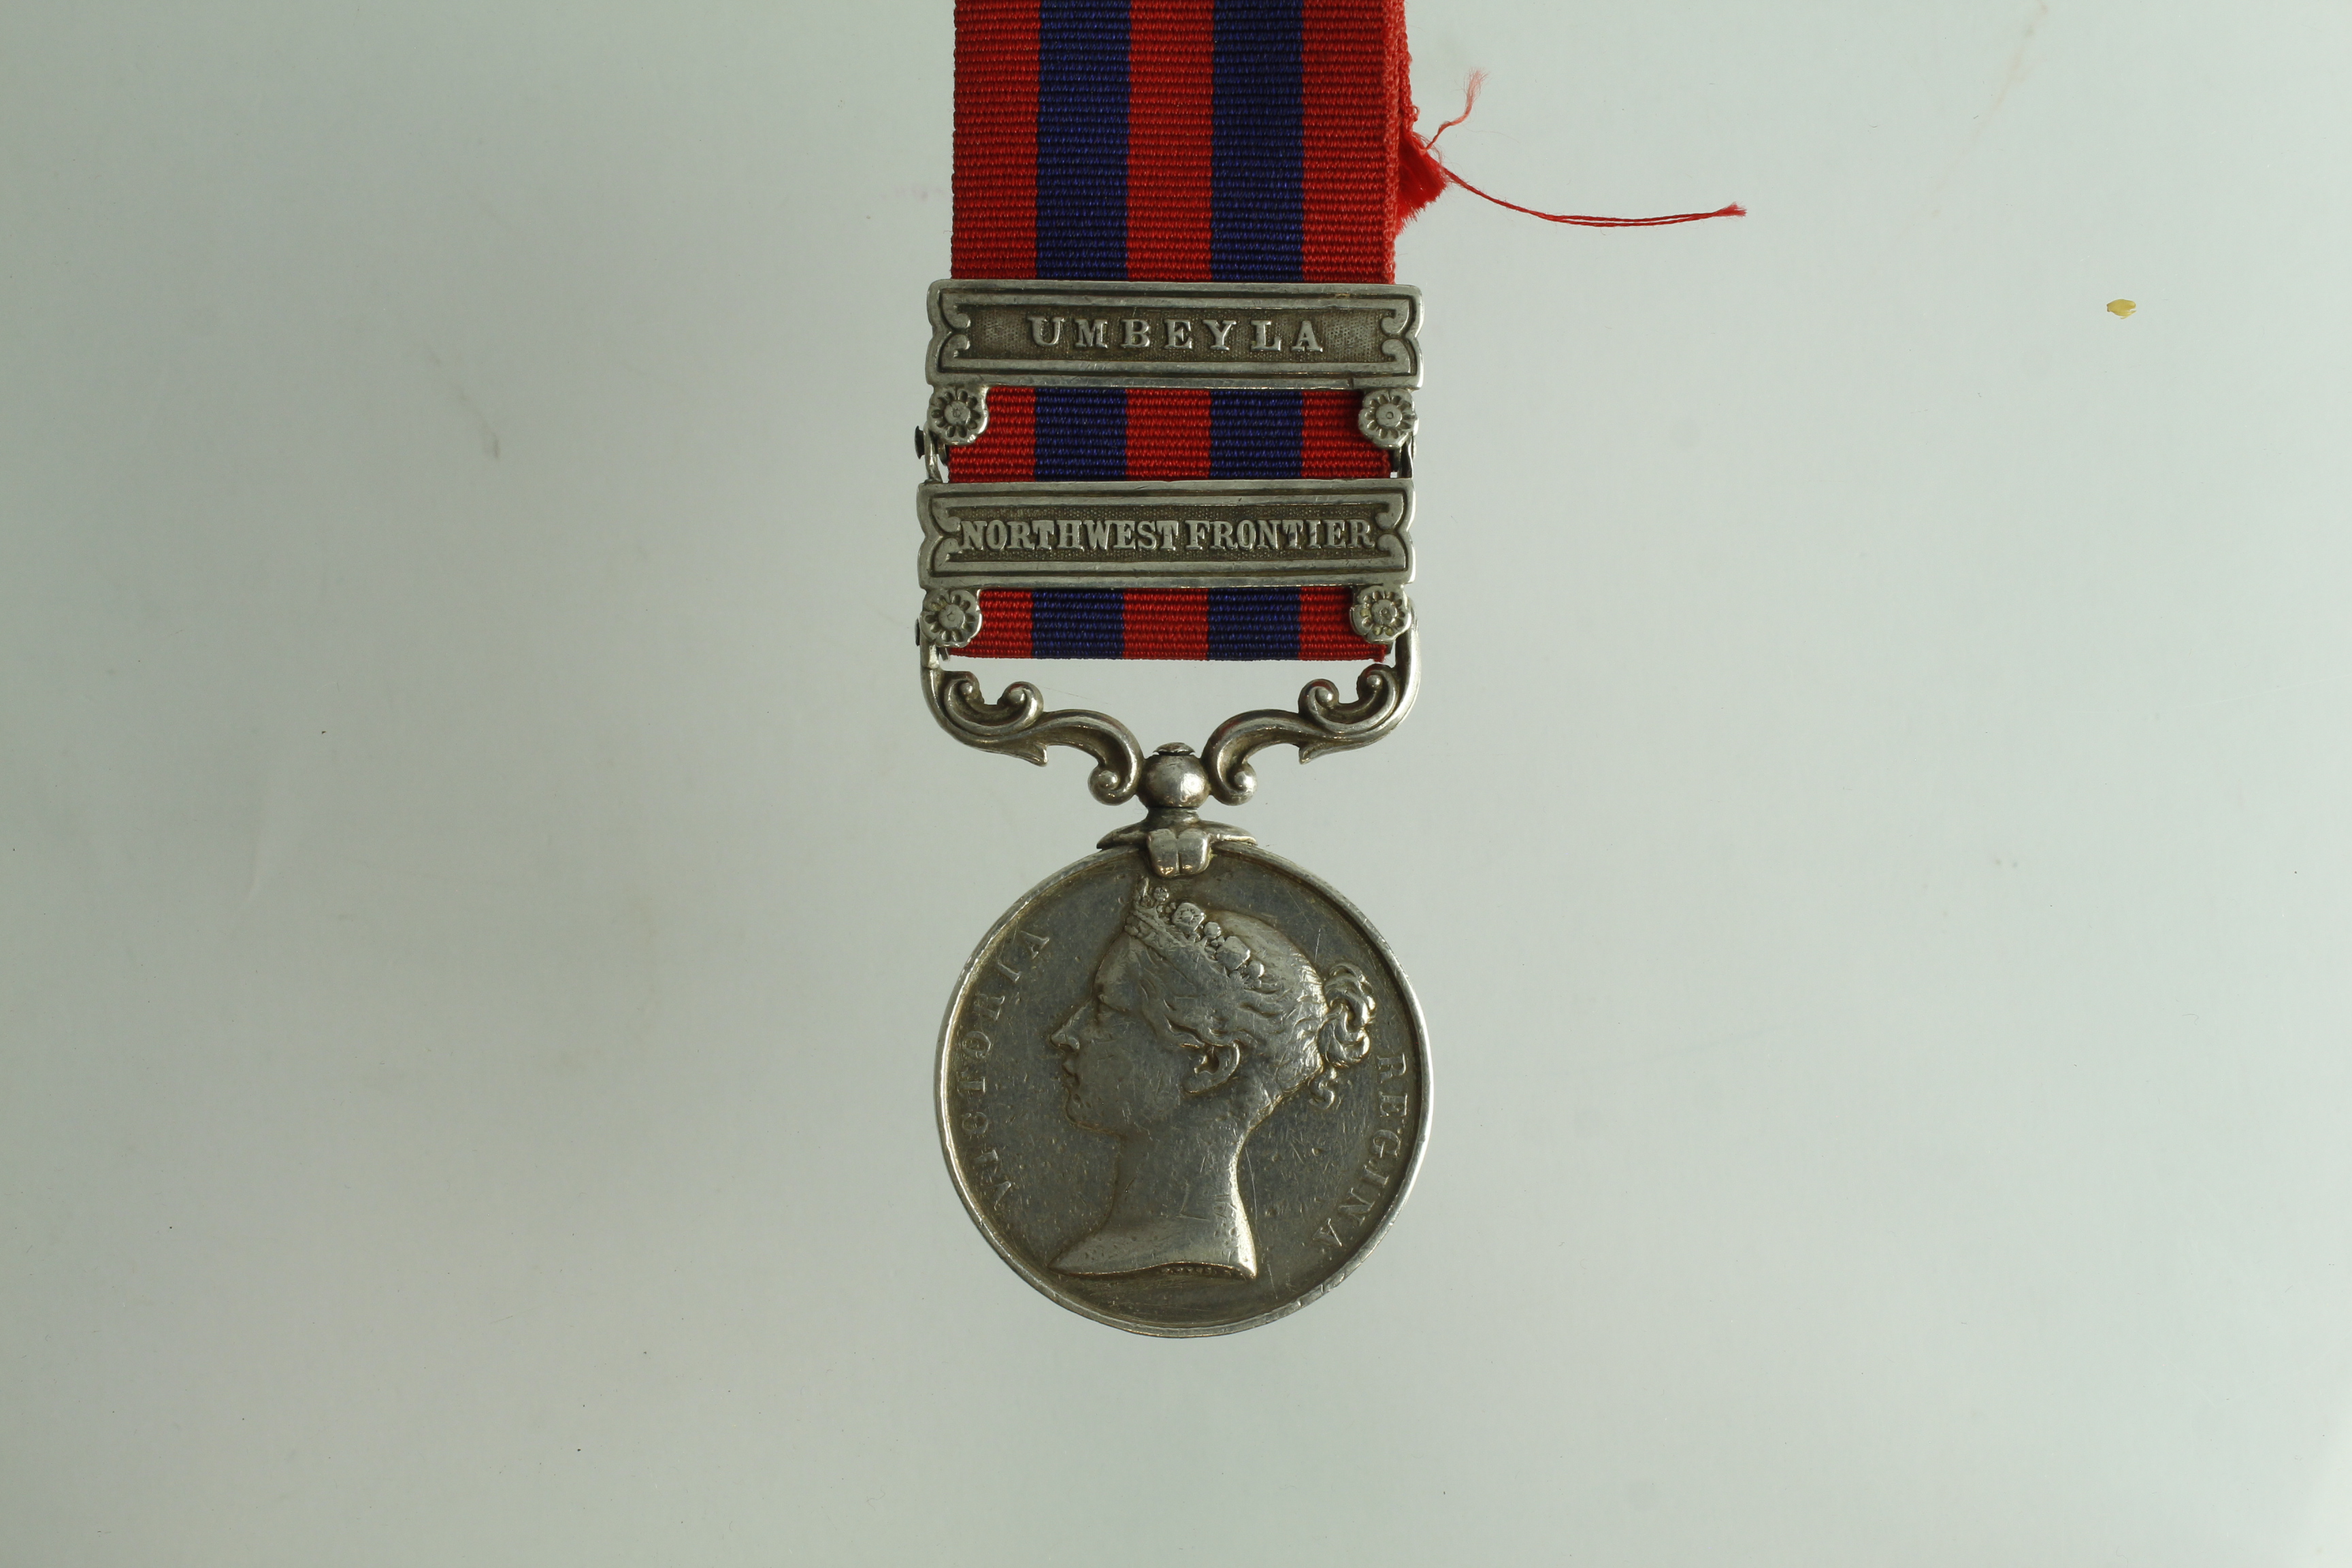 IGS 1854 with bars North West Frontier / Umbeyla, naming worn, medal worn overall and re clasped.